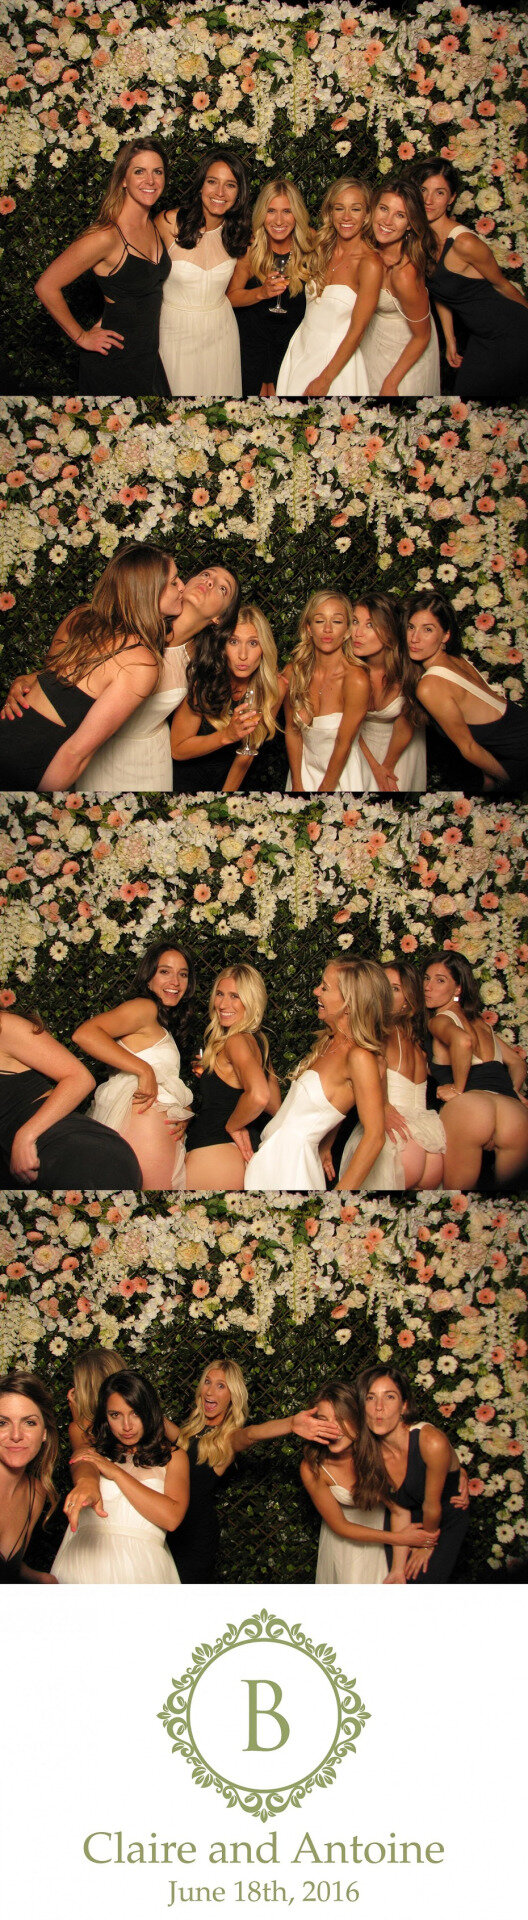 Bridesmaid flashes pussy in photobooth picture